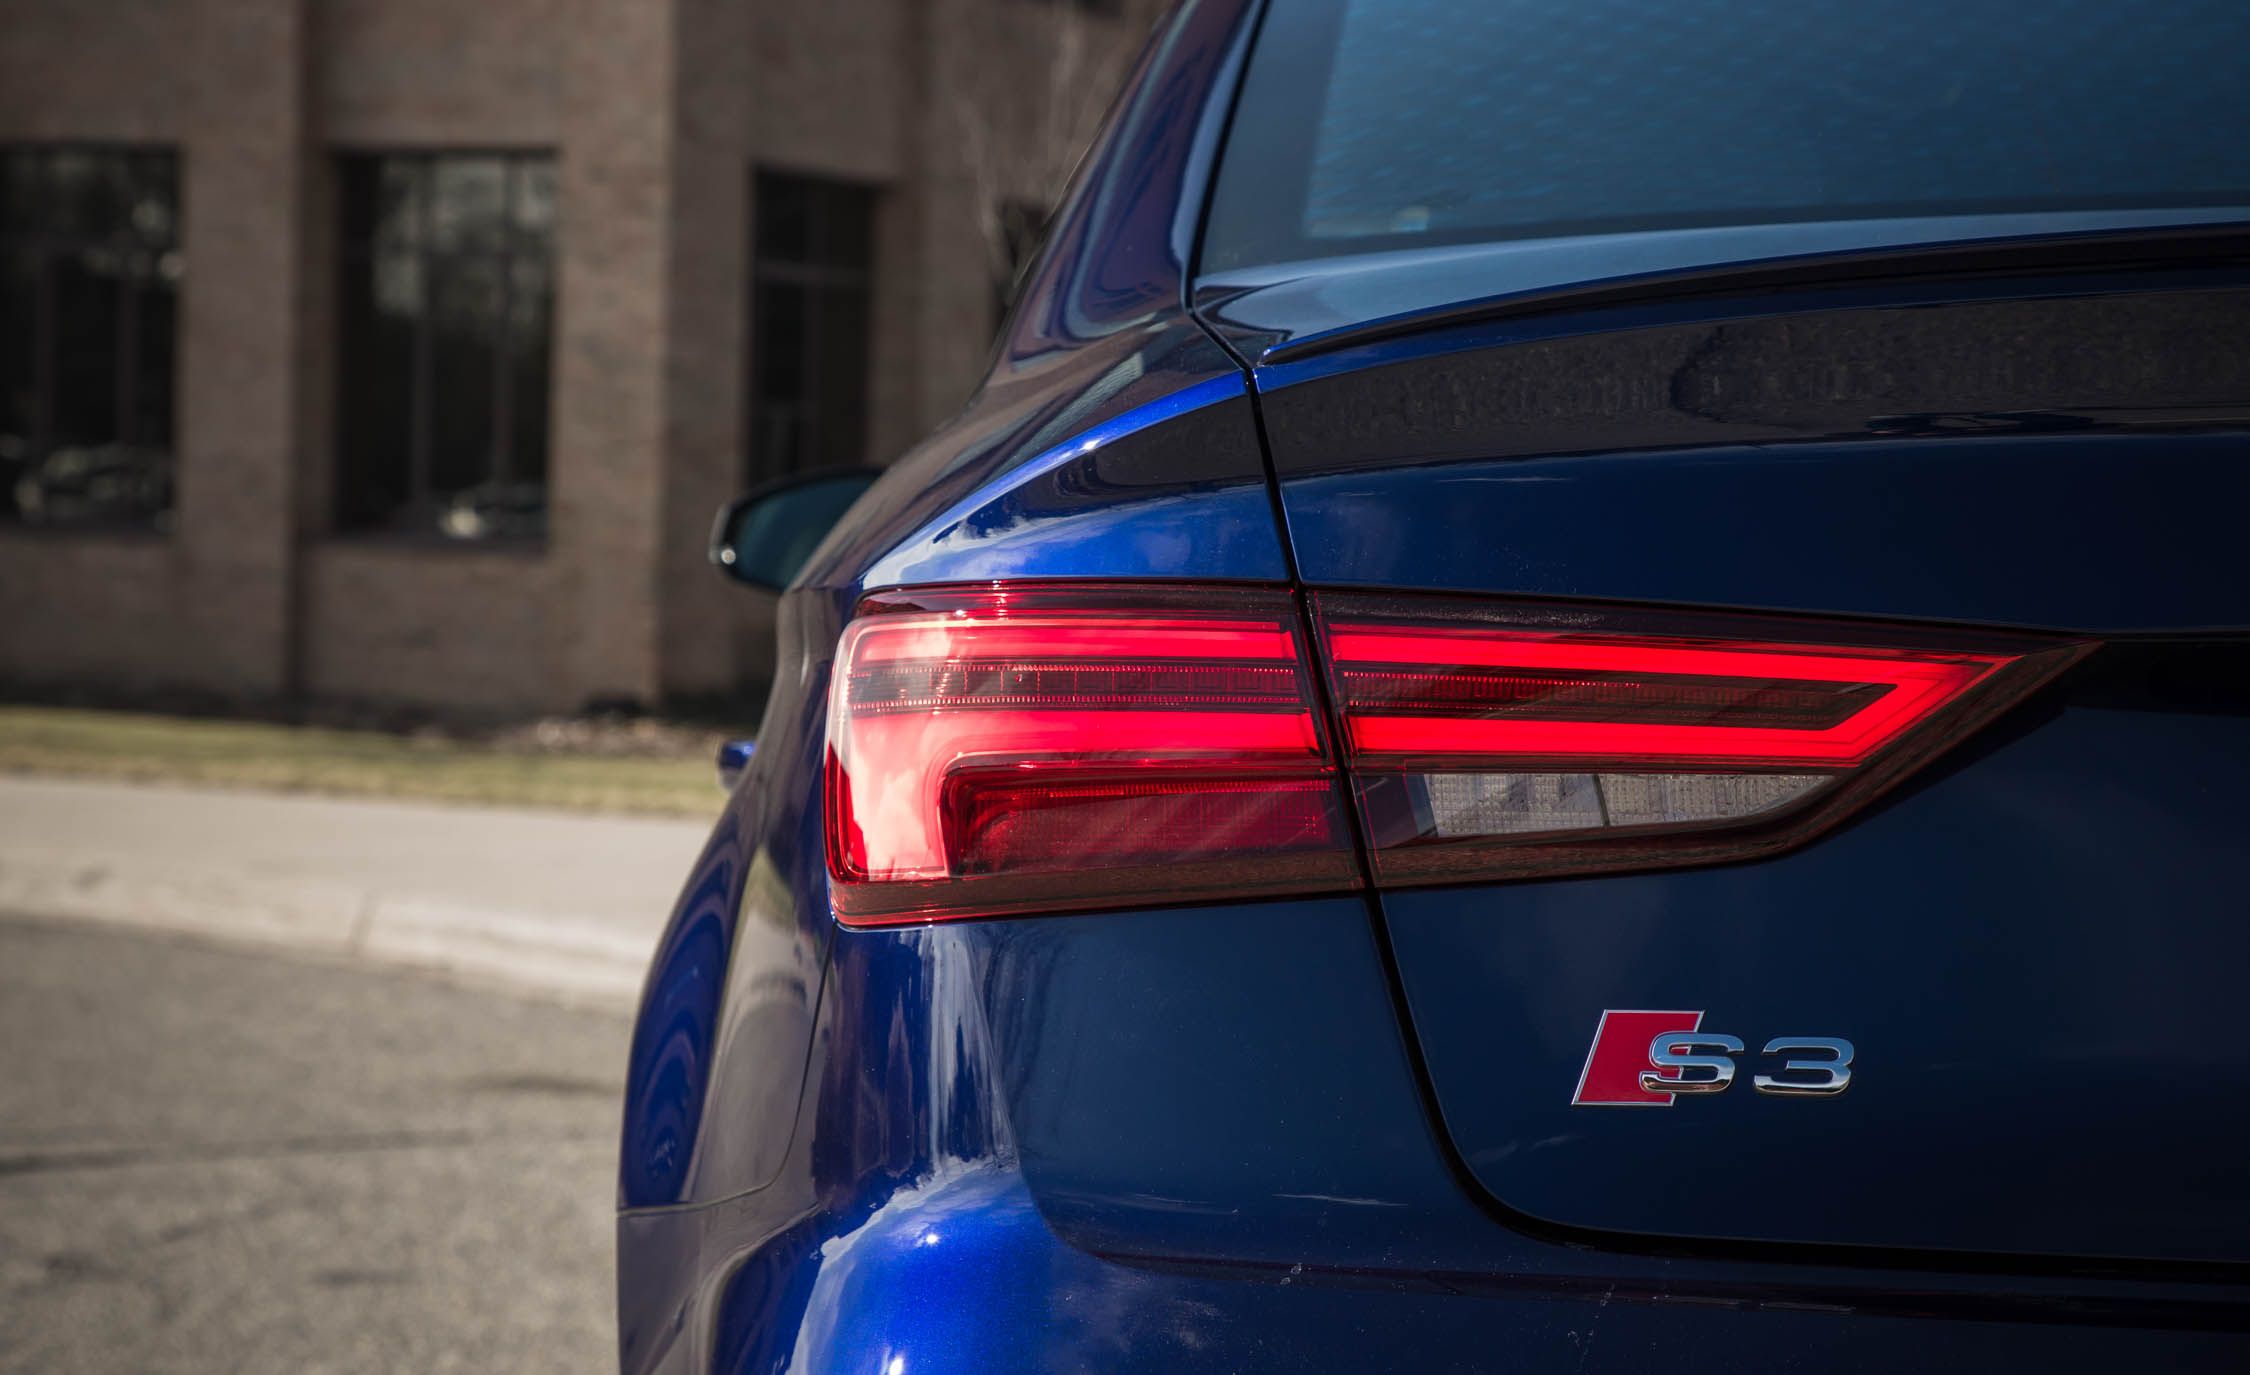 2017 Audi S3 Exterior View Taillight And Rear Badge (View 41 of 50)